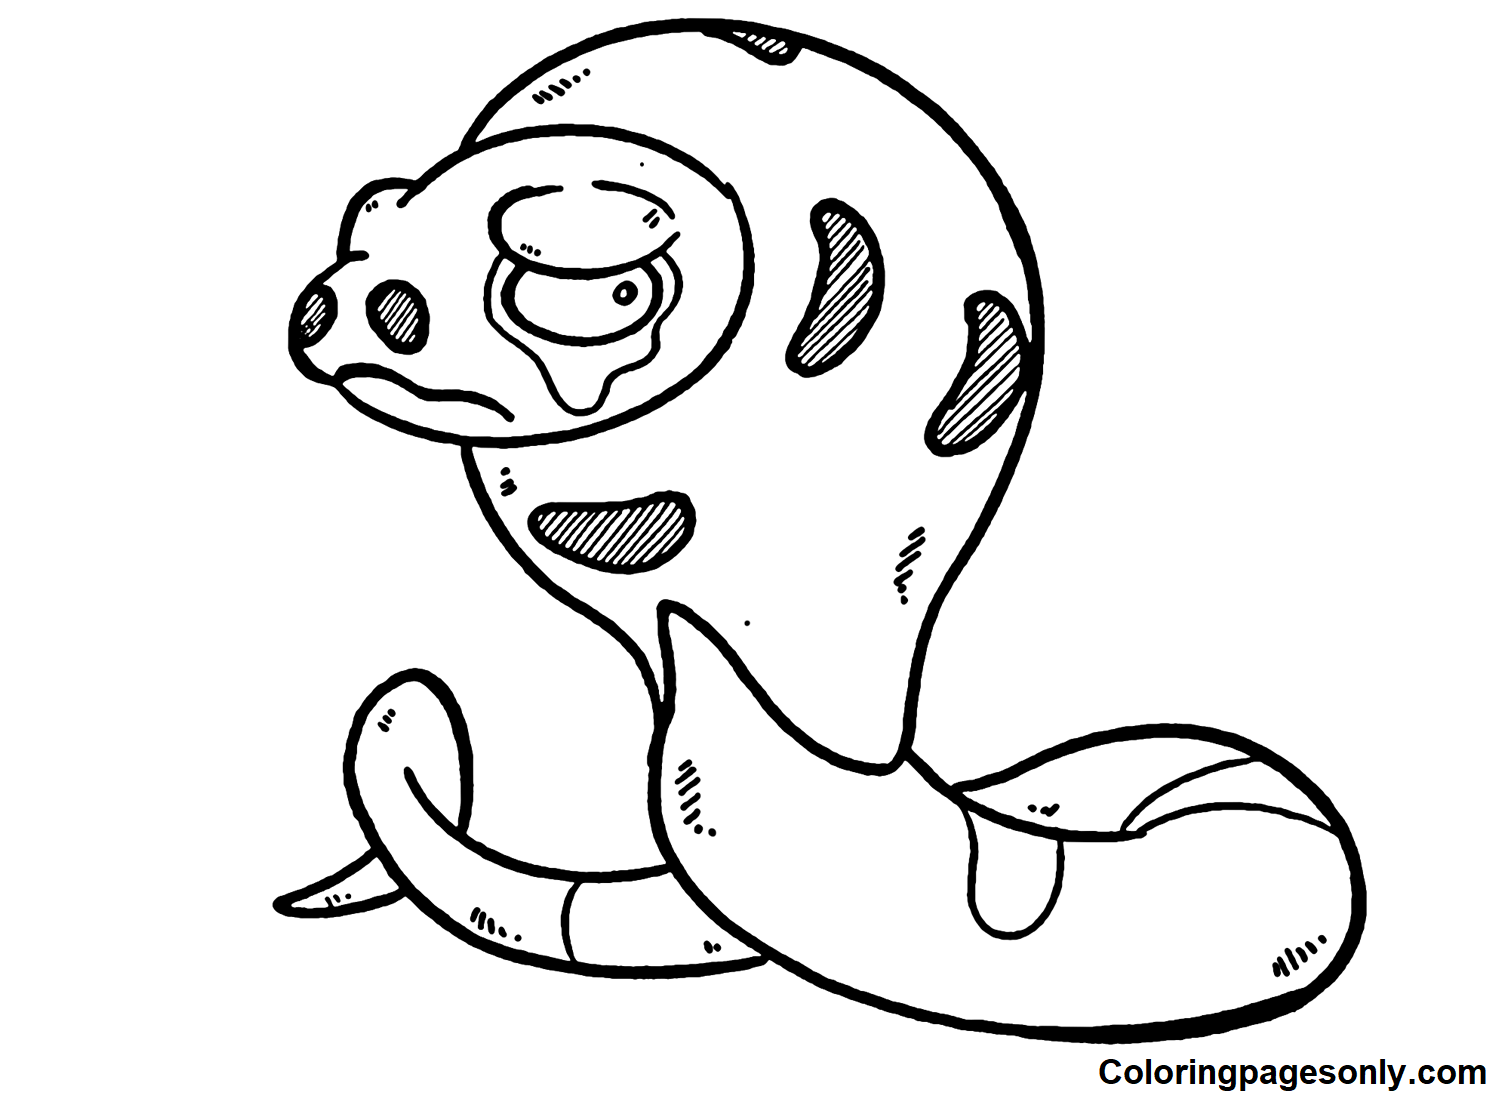 Pokemon Silicobra Images Coloring Pages